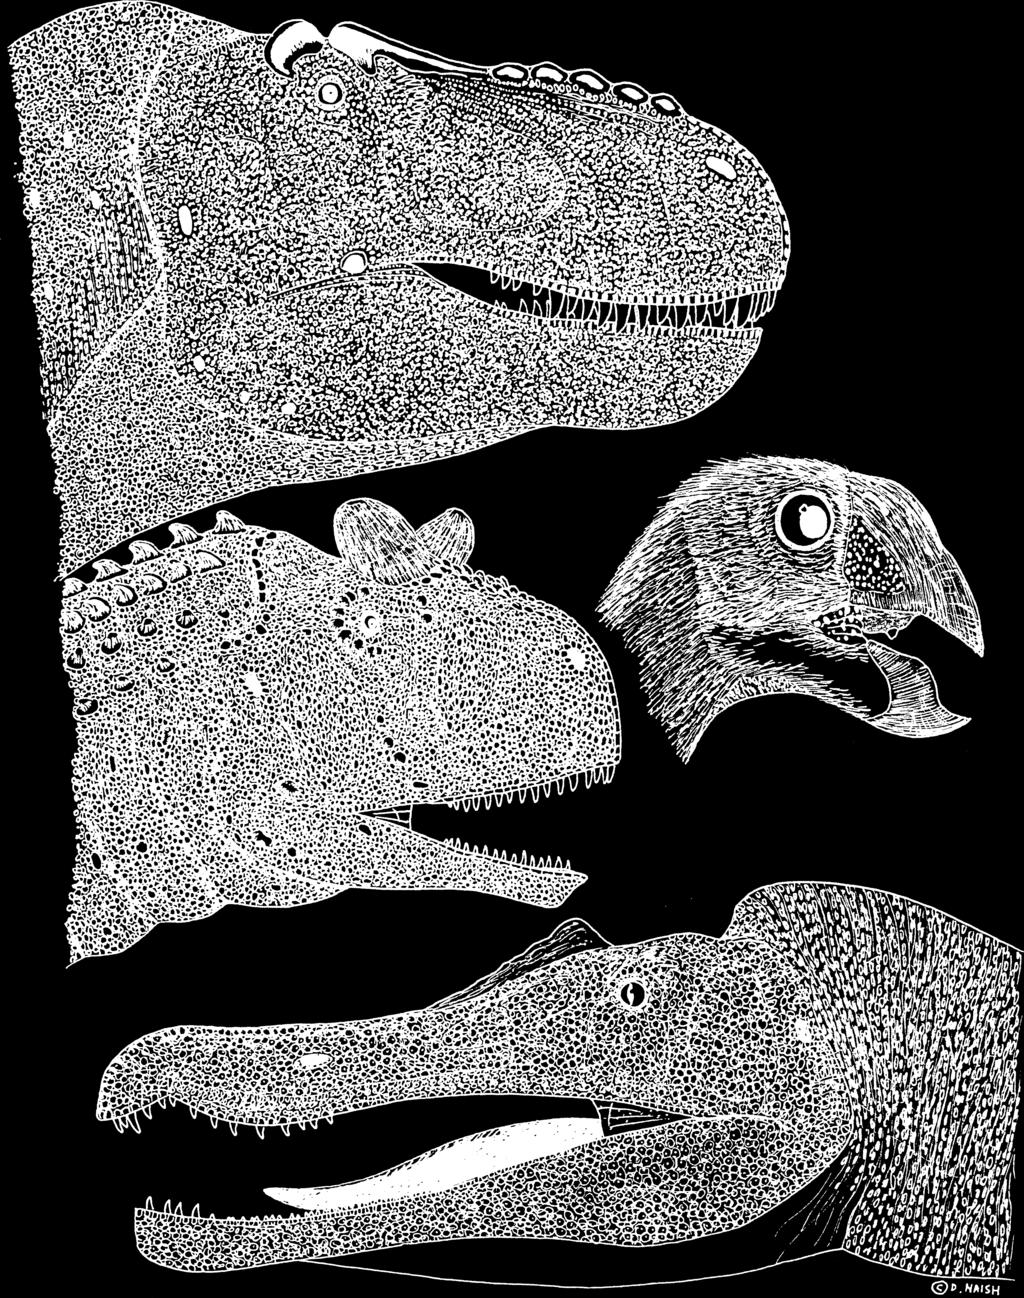 Fig. 5. Diversity in the heads of theropods.